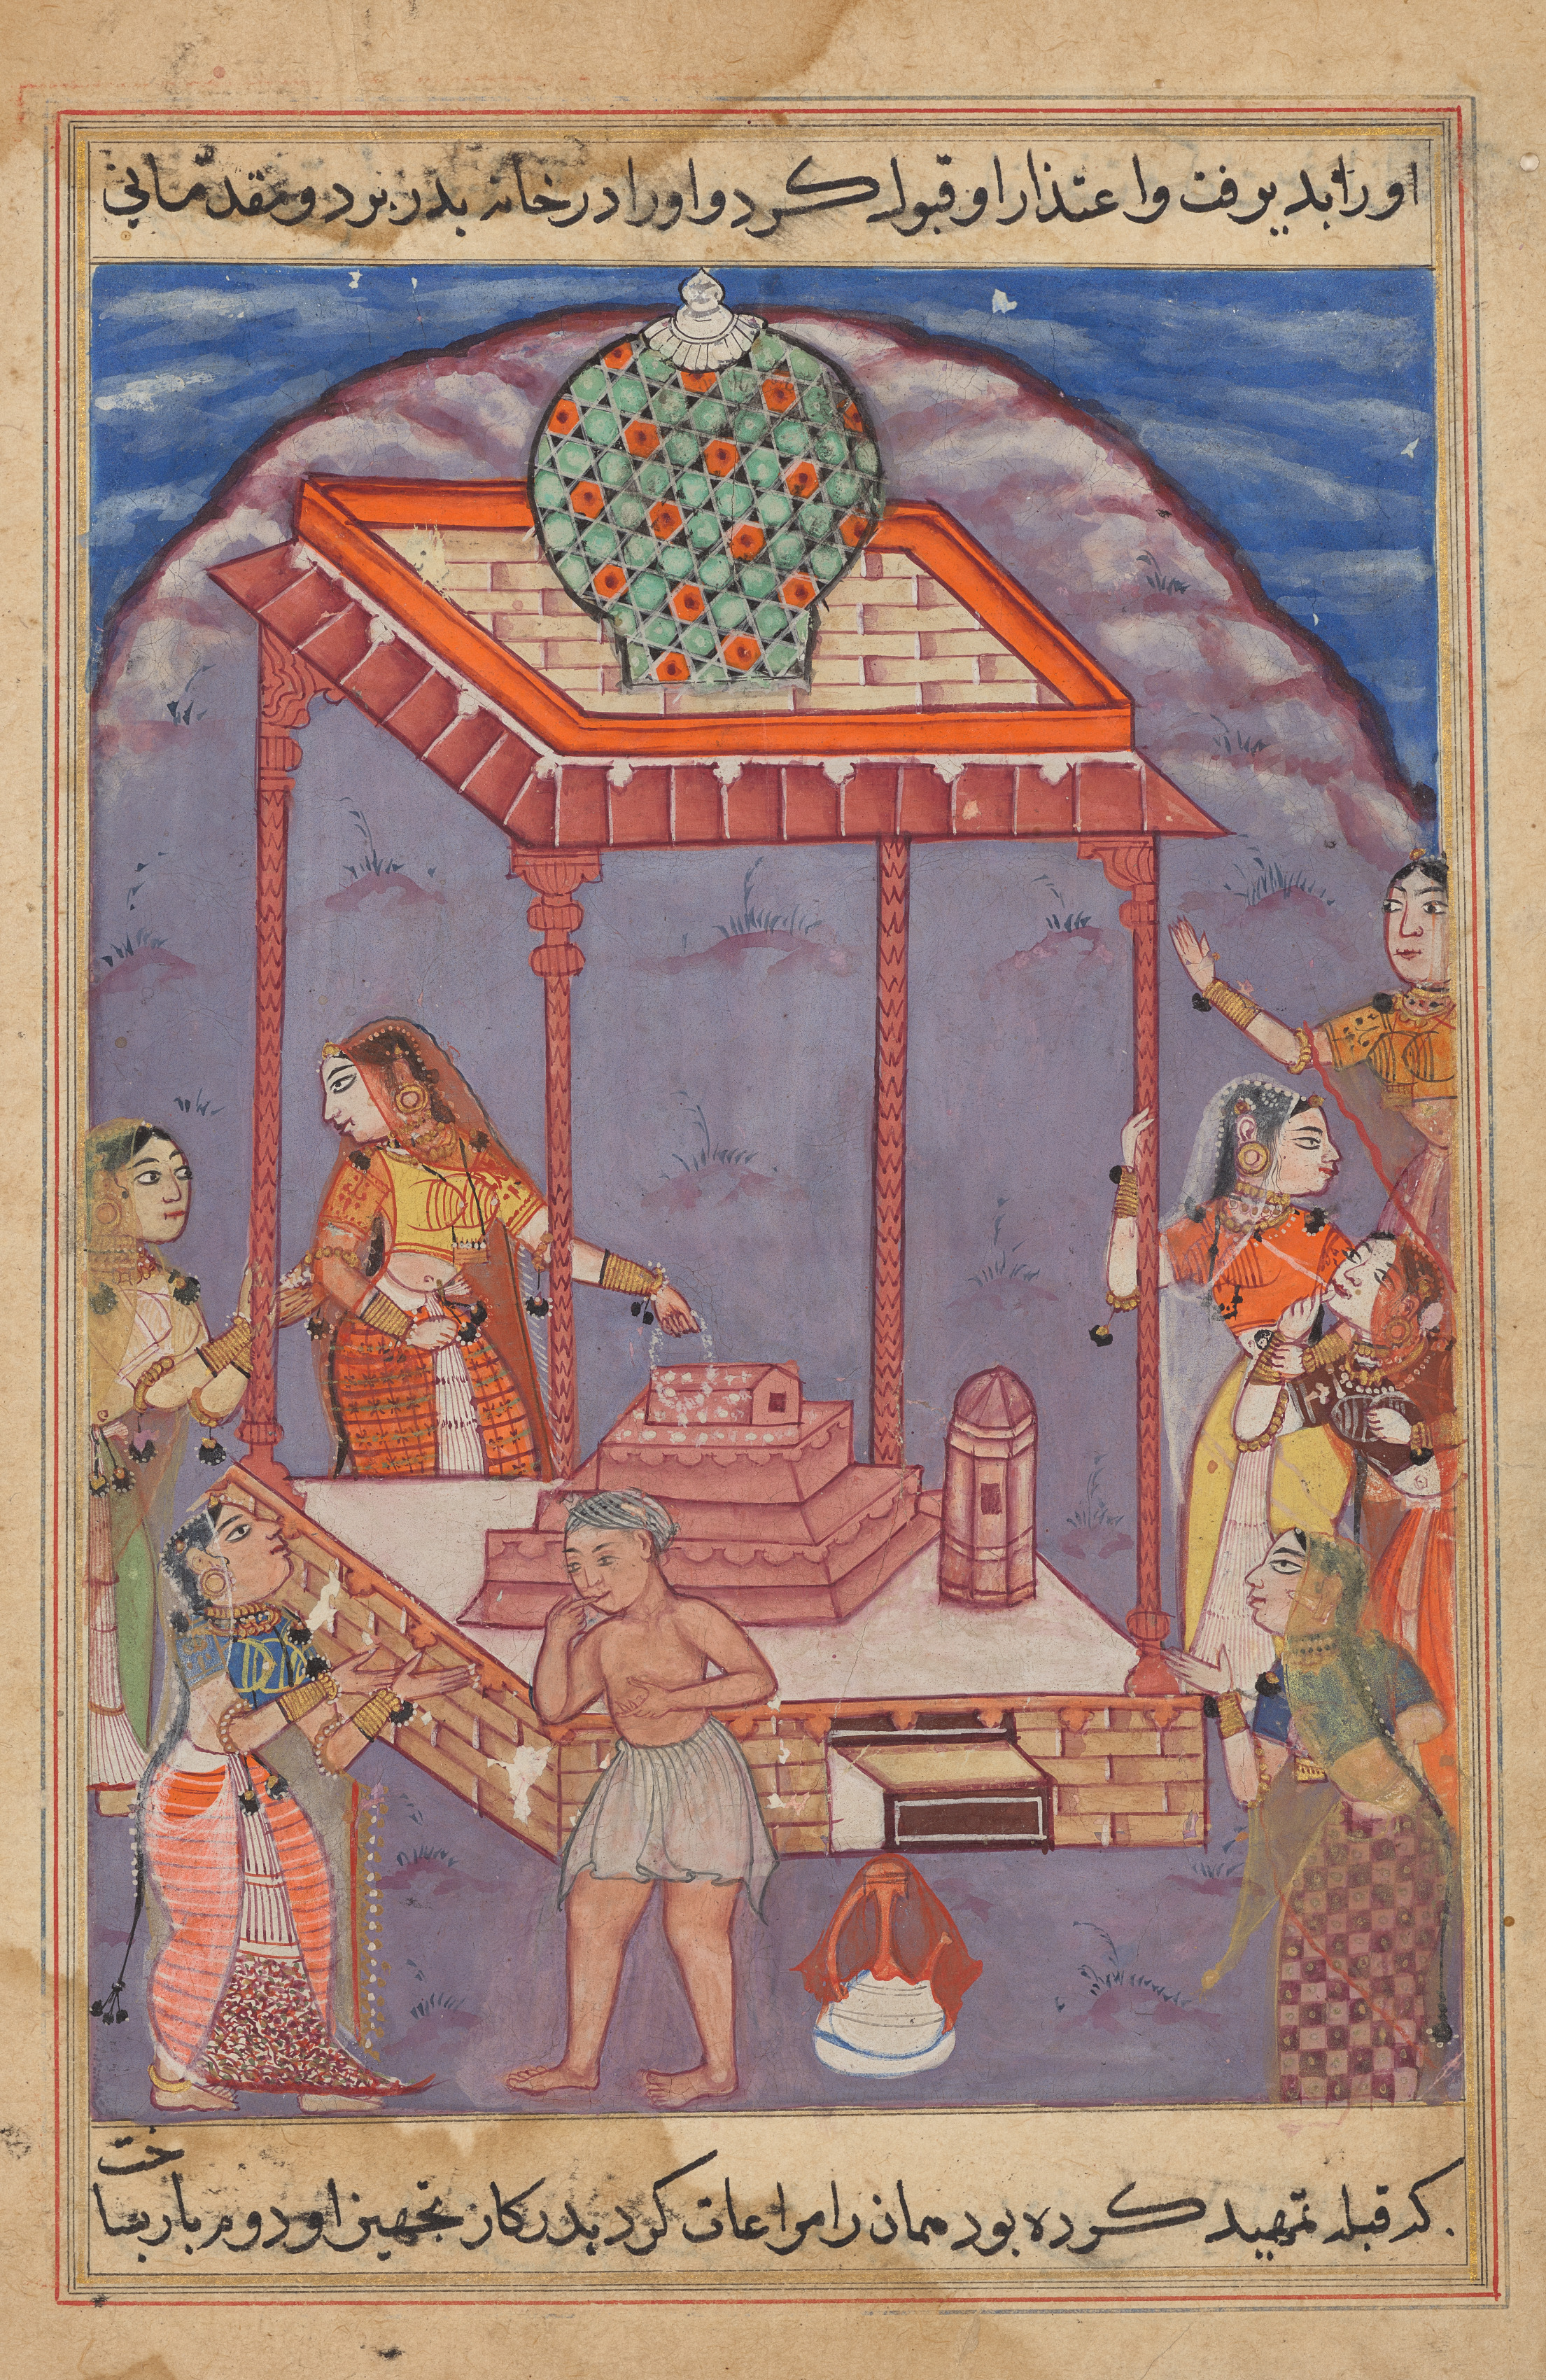 The destitute Mukhtar meets his wife Maimuna at a holy shrine, from a Tuti-nama (Tales of a Parrot): Twenty-fifth Night